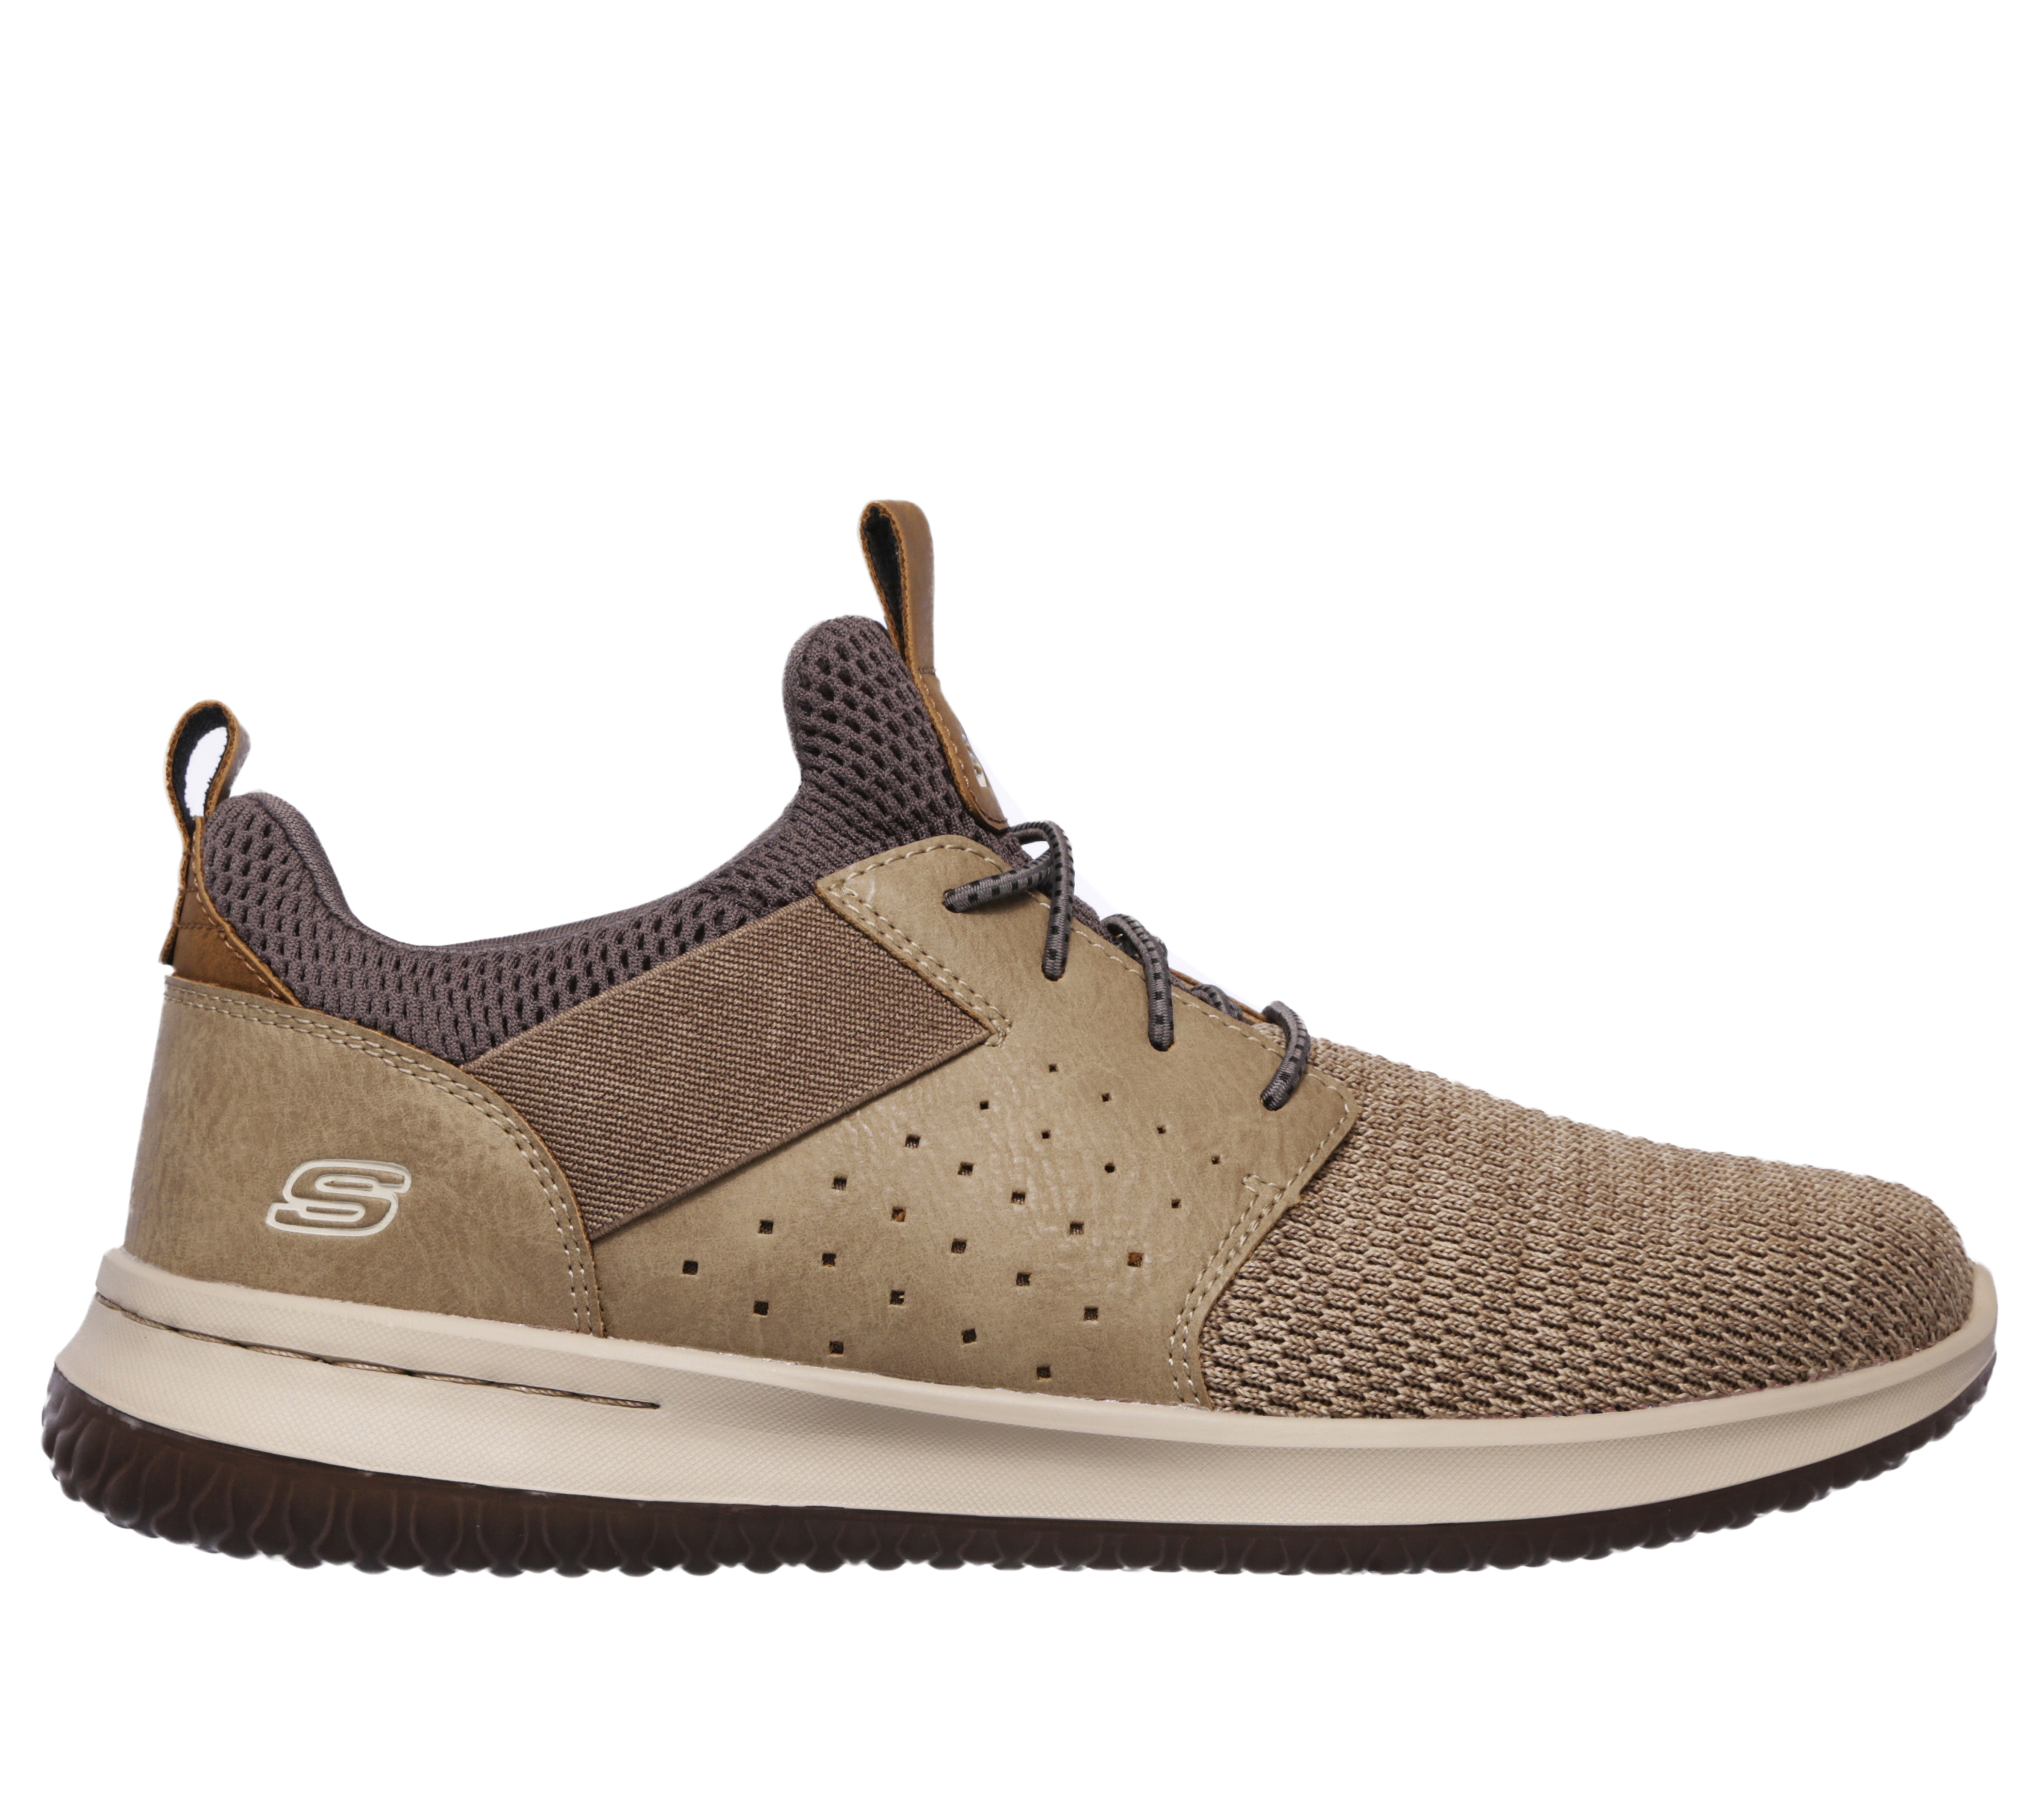 skechers classic fit delson camben